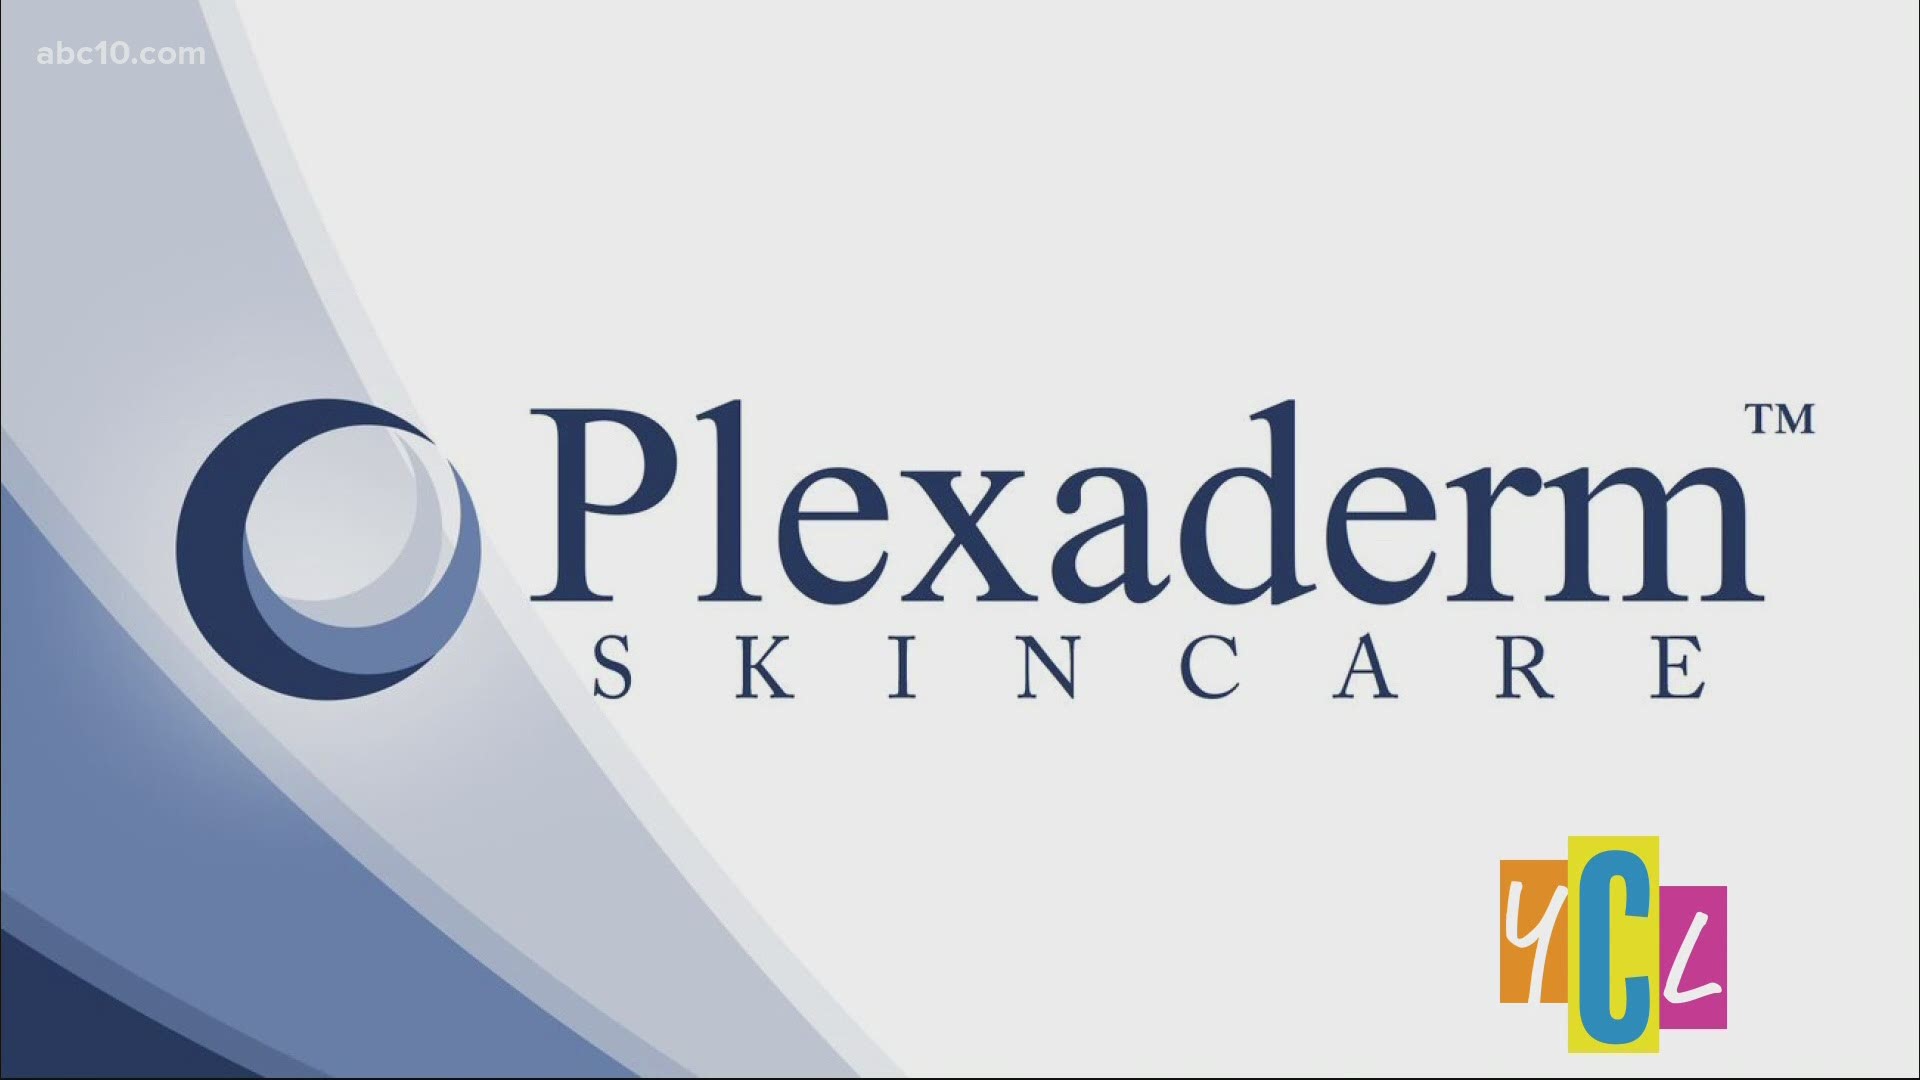 Plexaderm could help reduce under eye bags, dark circles, and wrinkles from a view. This is a paid segment for True Earth Health Solutions.